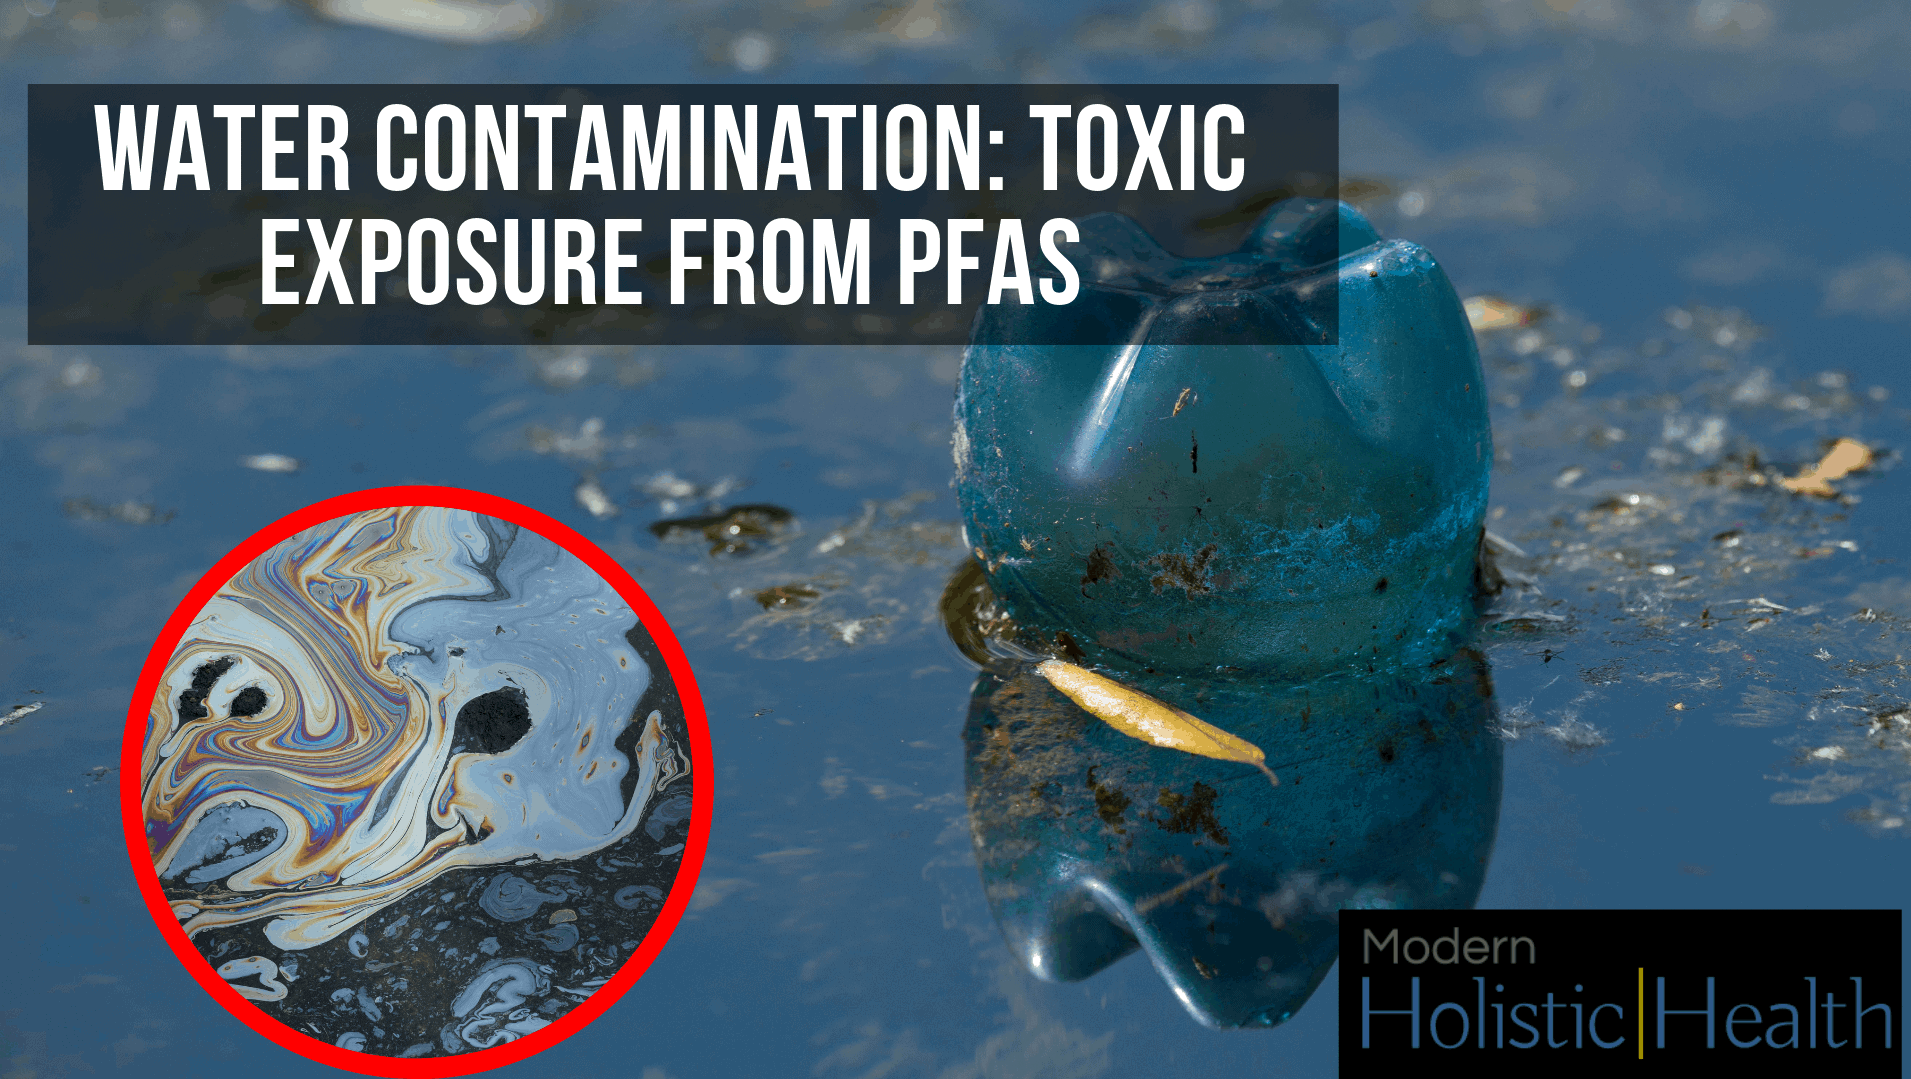 WATER CONTAMINATION TOXIC EXPOSURE FROM PFAS